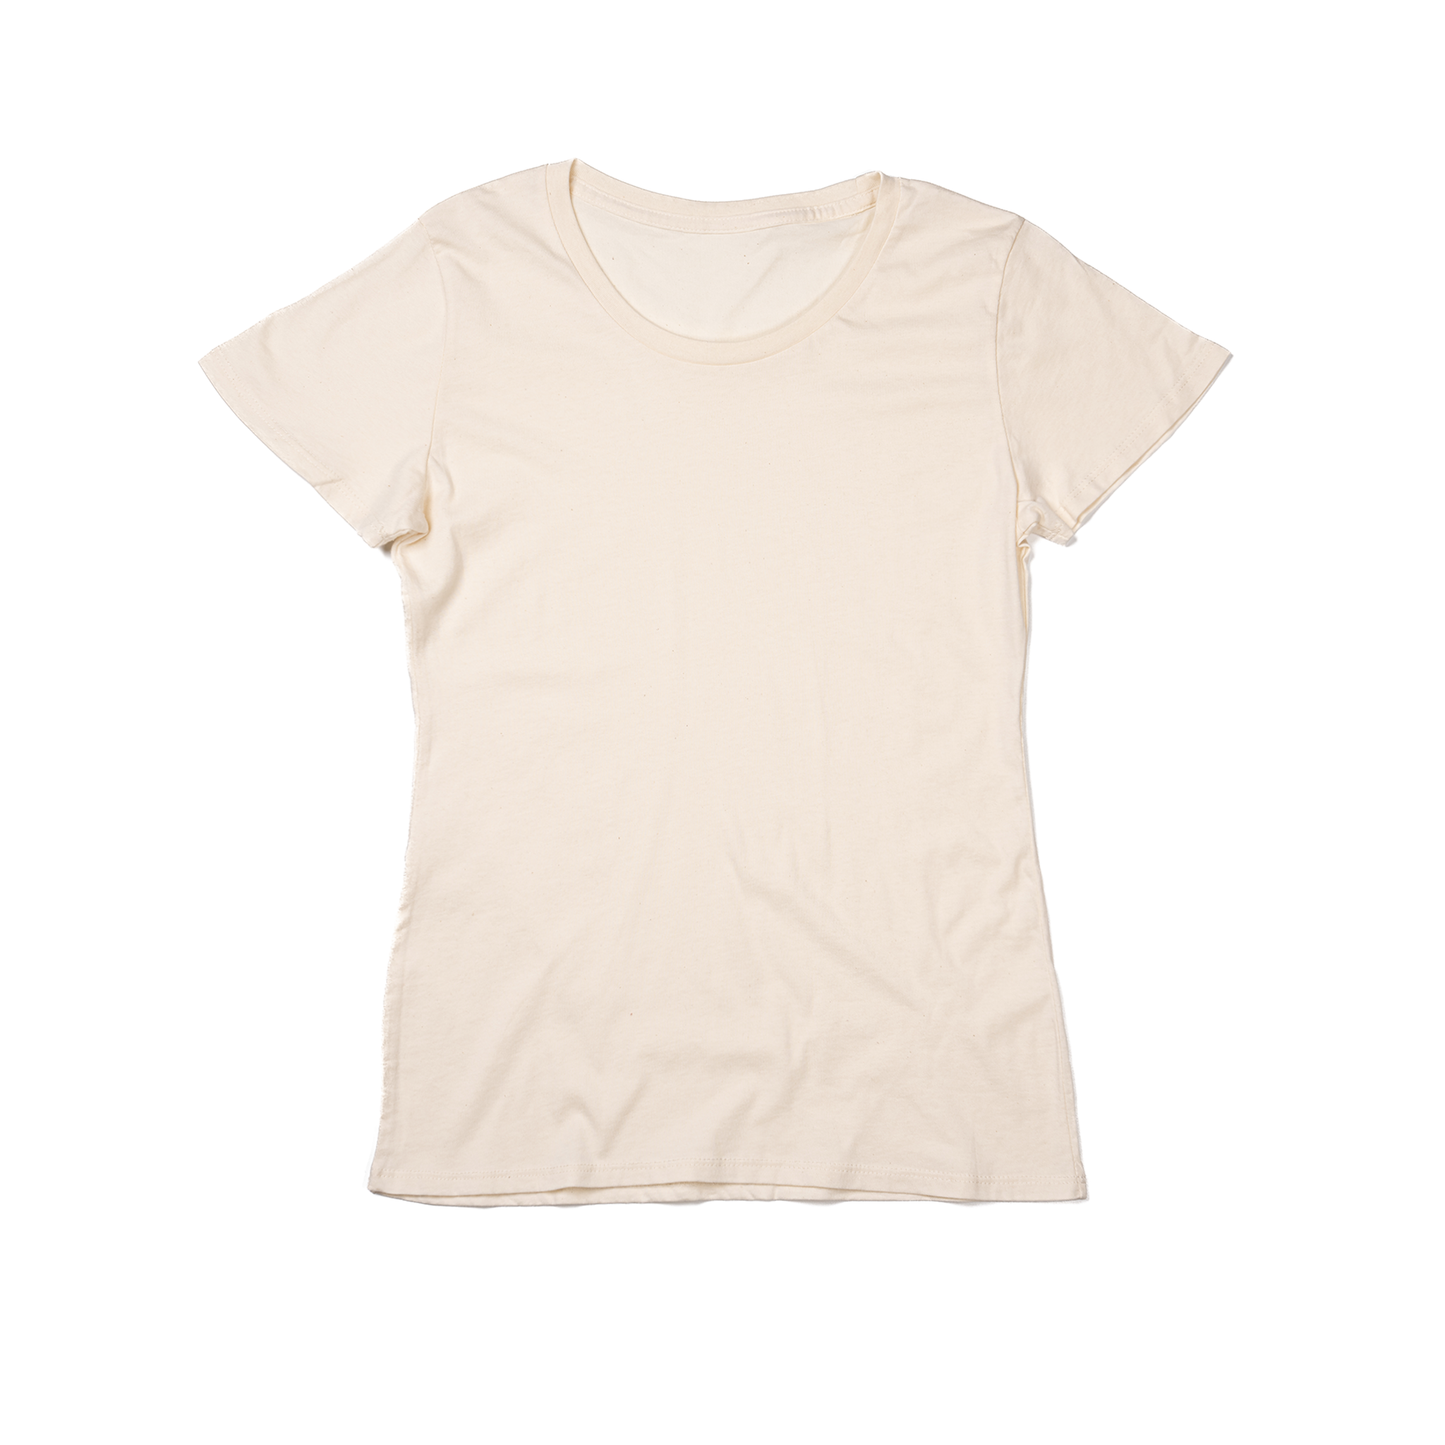 Women's Fitted Tee - Royal Apparel - 5001ORGW - Natural